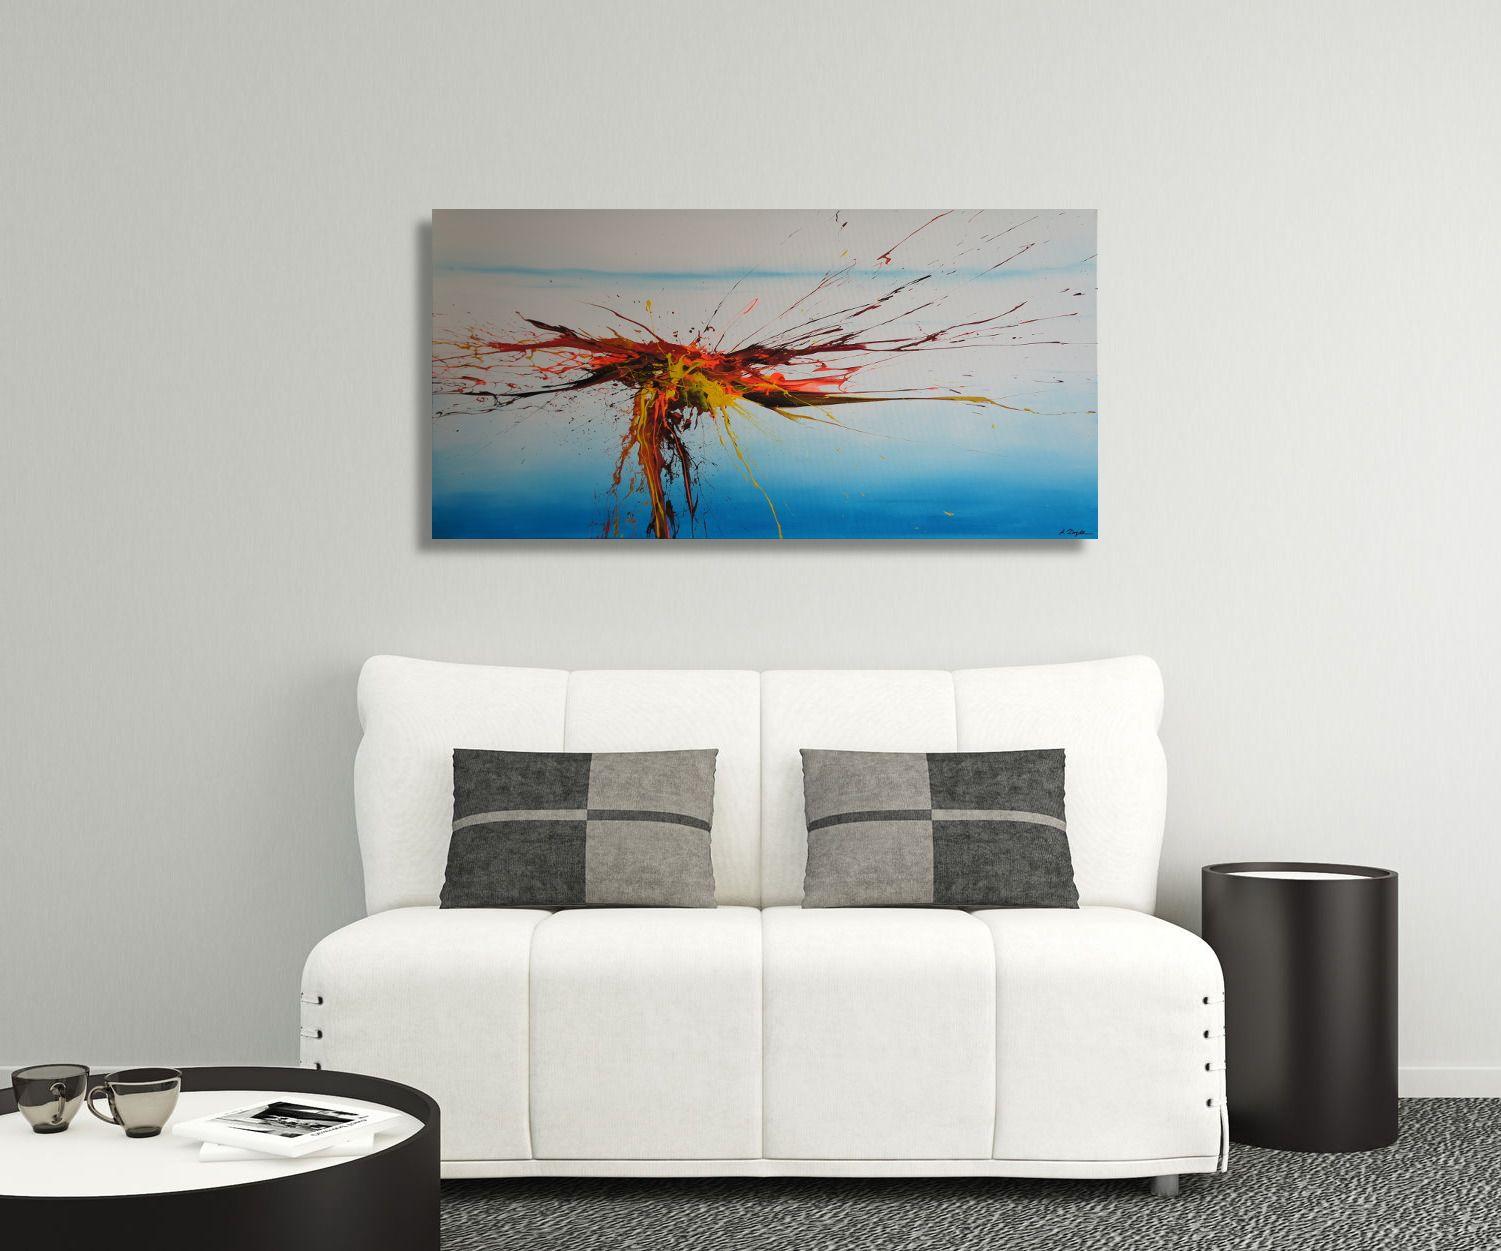 Another large horizontal one from the Sky Buzz series within my Spirits Of Skies Collection.    This one comes with touches of bright neon orange and yellow mixed with black and dark red, against a distant appearing sky that gives an effect of